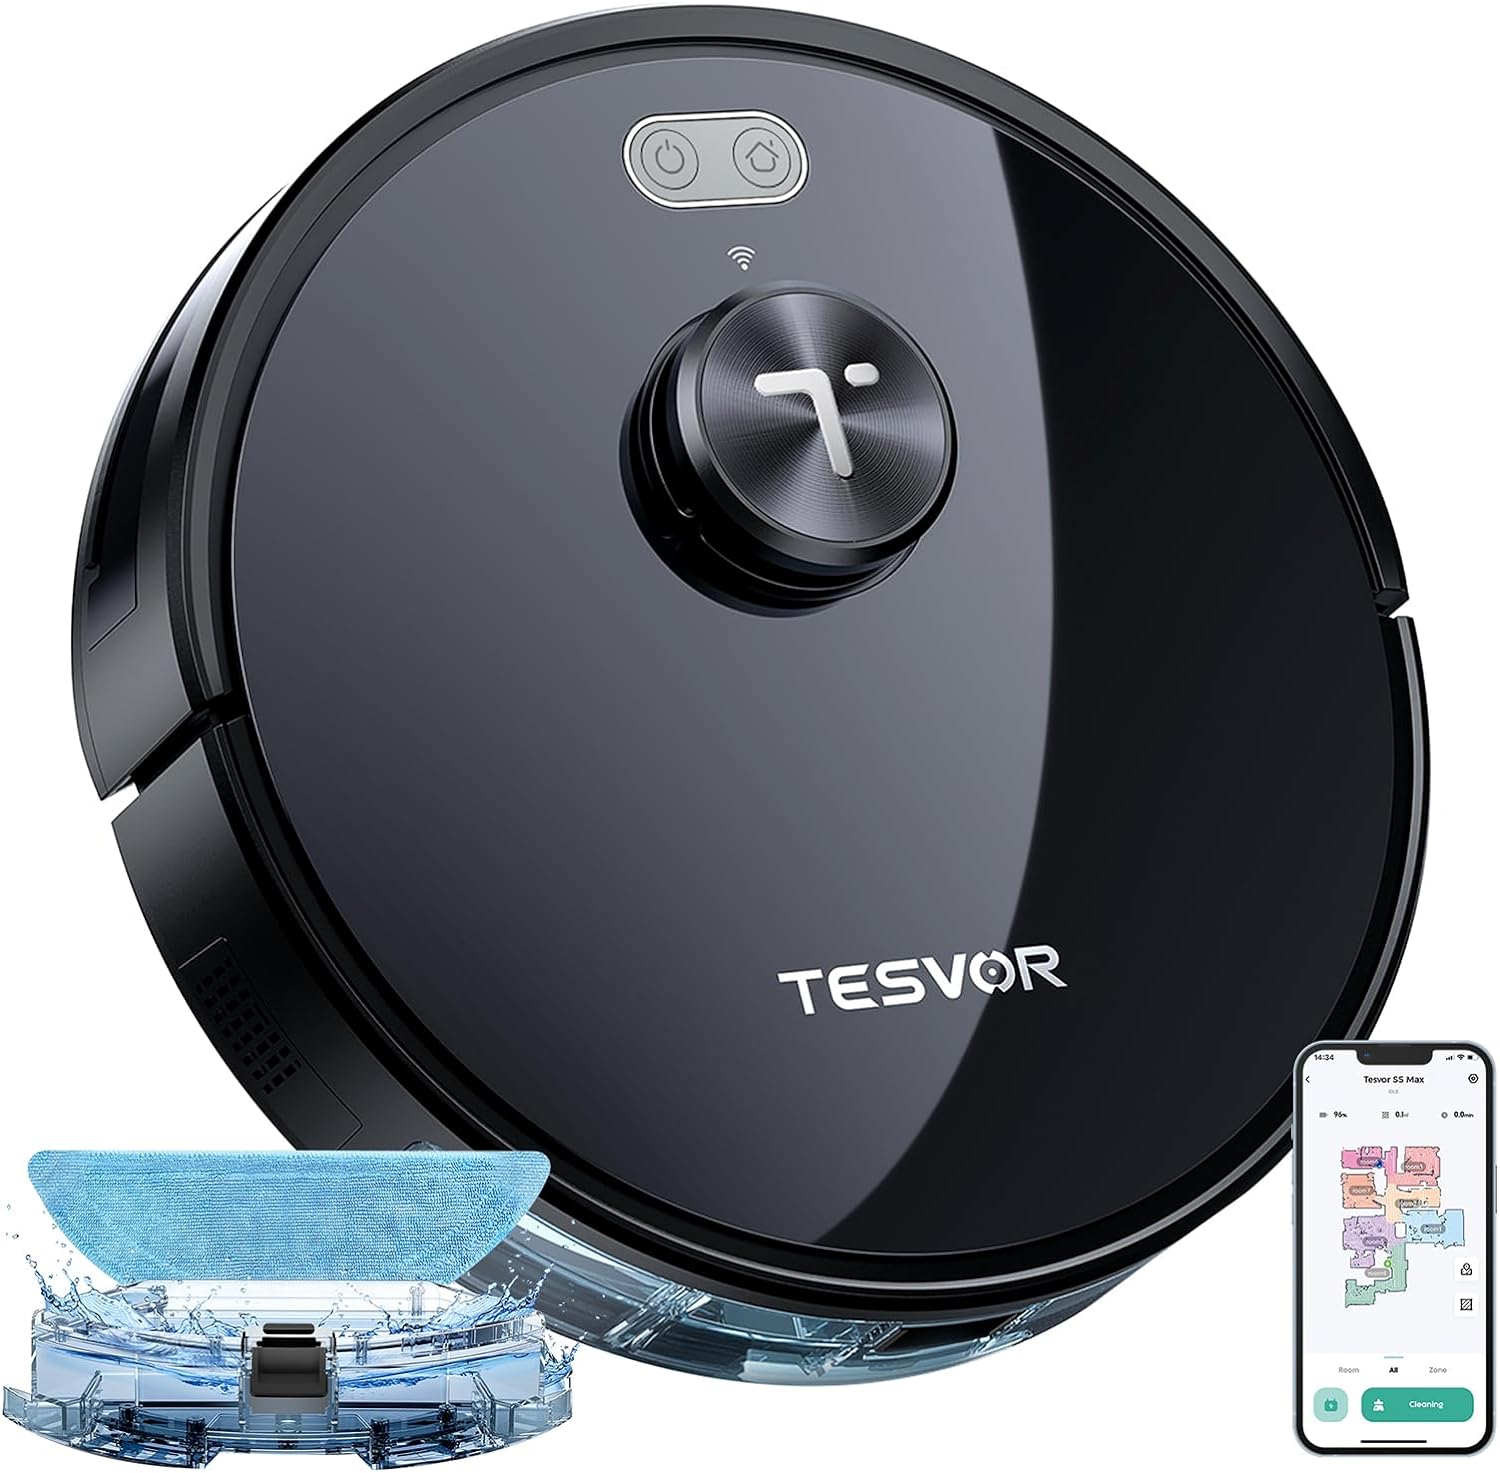 Tesvor S5 Max Review: Powerful Robot Vacuum with Mop Combo